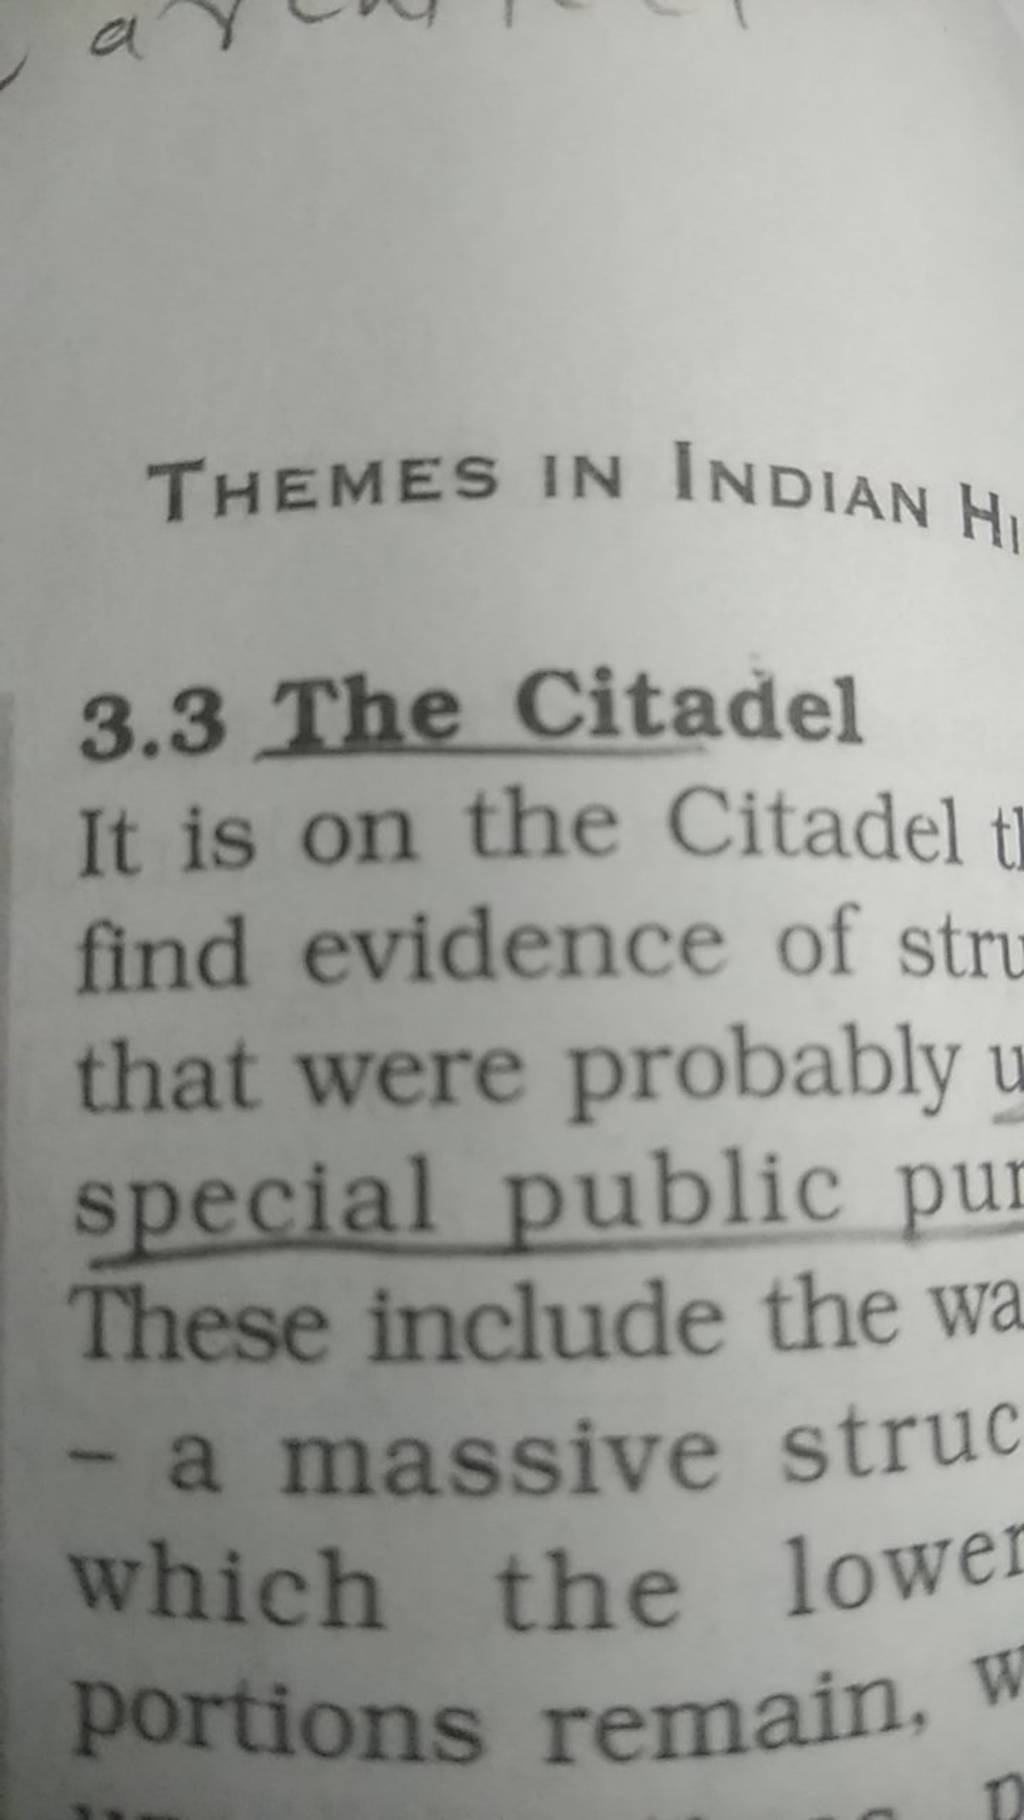 THEMES IN INDIAN H,
3.3 The Citadel It is on the Citadel find evidence